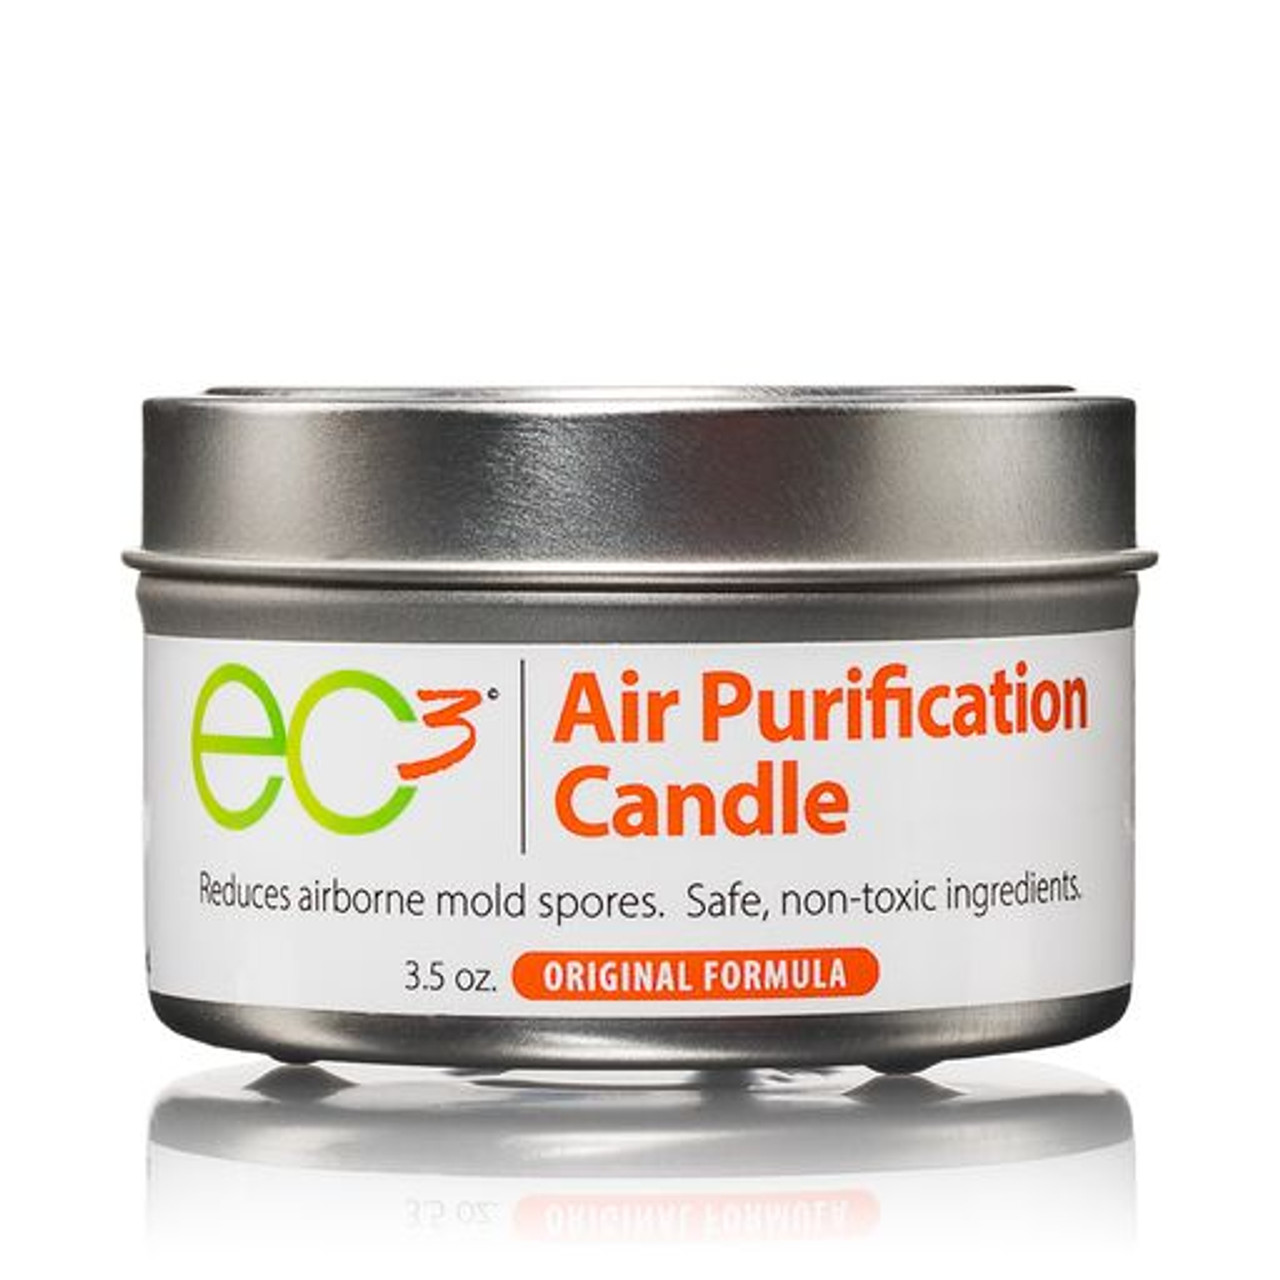  CitriSafe Remedy Maintenance Candle - Air Purification